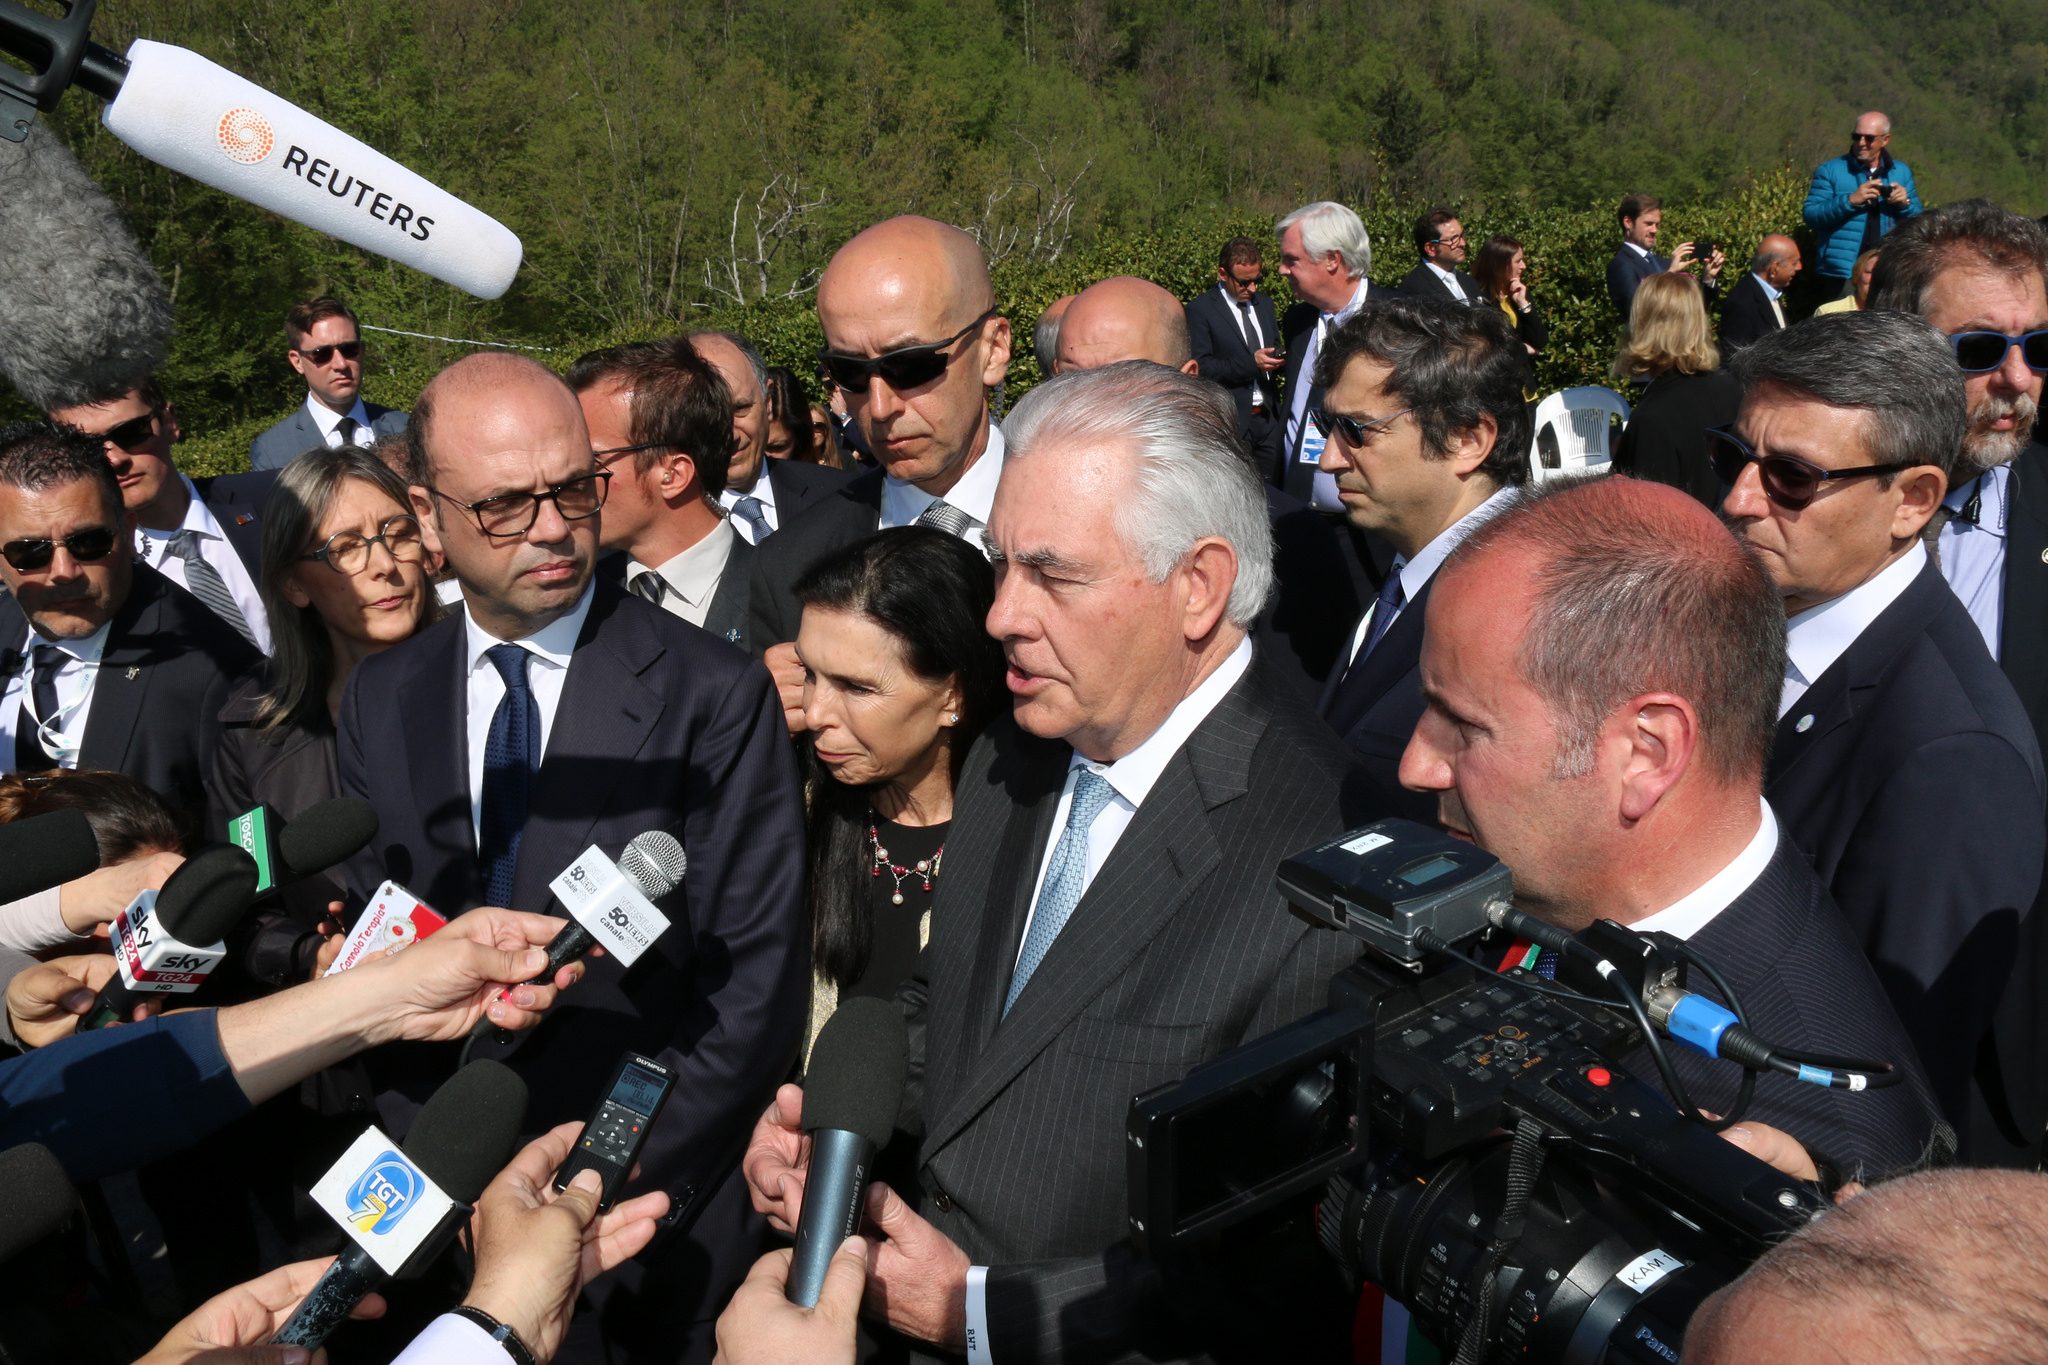 MEETING THE MEDIA. US Secretary of State Rex Tillerson addresses reporters at the Sant'Anna di Stazzema massacre memorial site in Lucca, Italy, on April 10, 2017. US State Department photo/Public Domain 